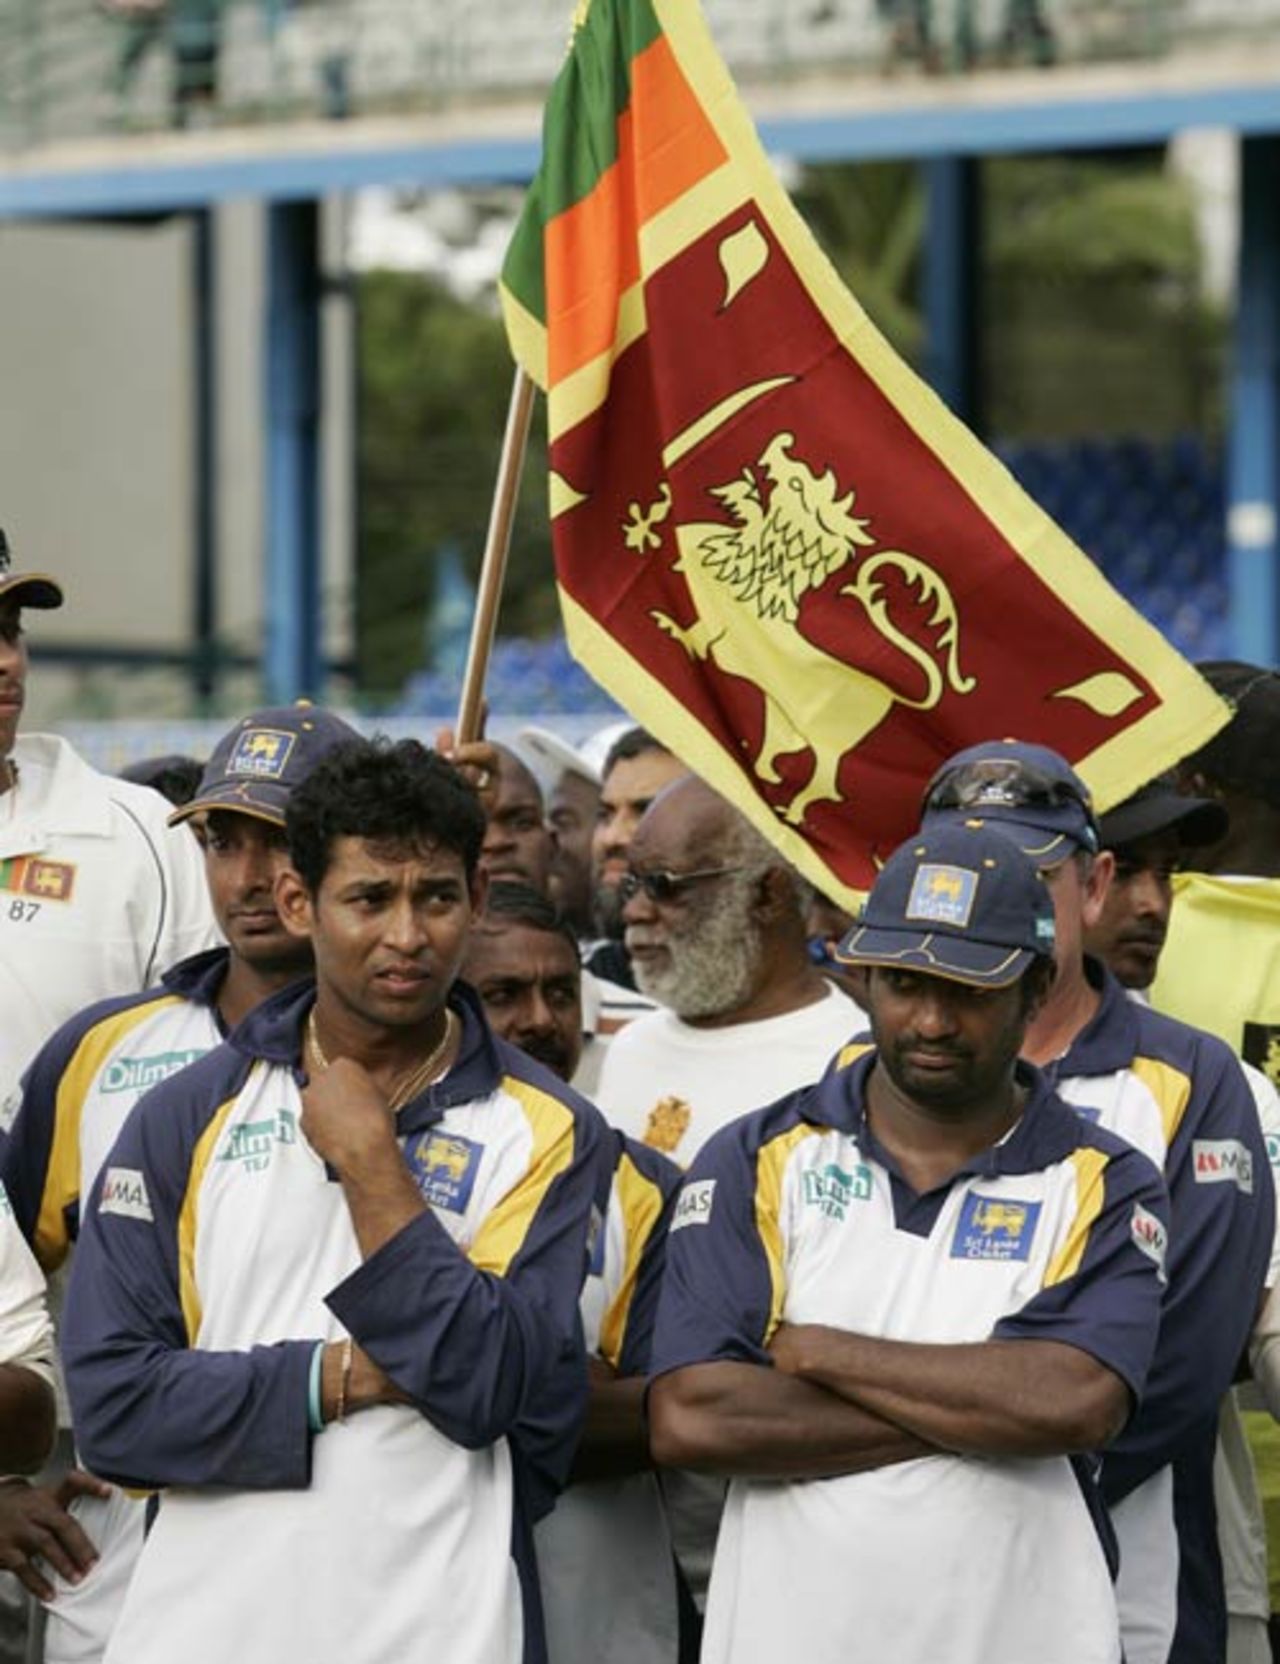 Tillakaratne Dilshan and Muttiah Muralitharan after West Indies levelled the series 1-1,  West Indies v Sri Lanka, 2nd Test, Trinidad, 4th day, April 6, 2008 